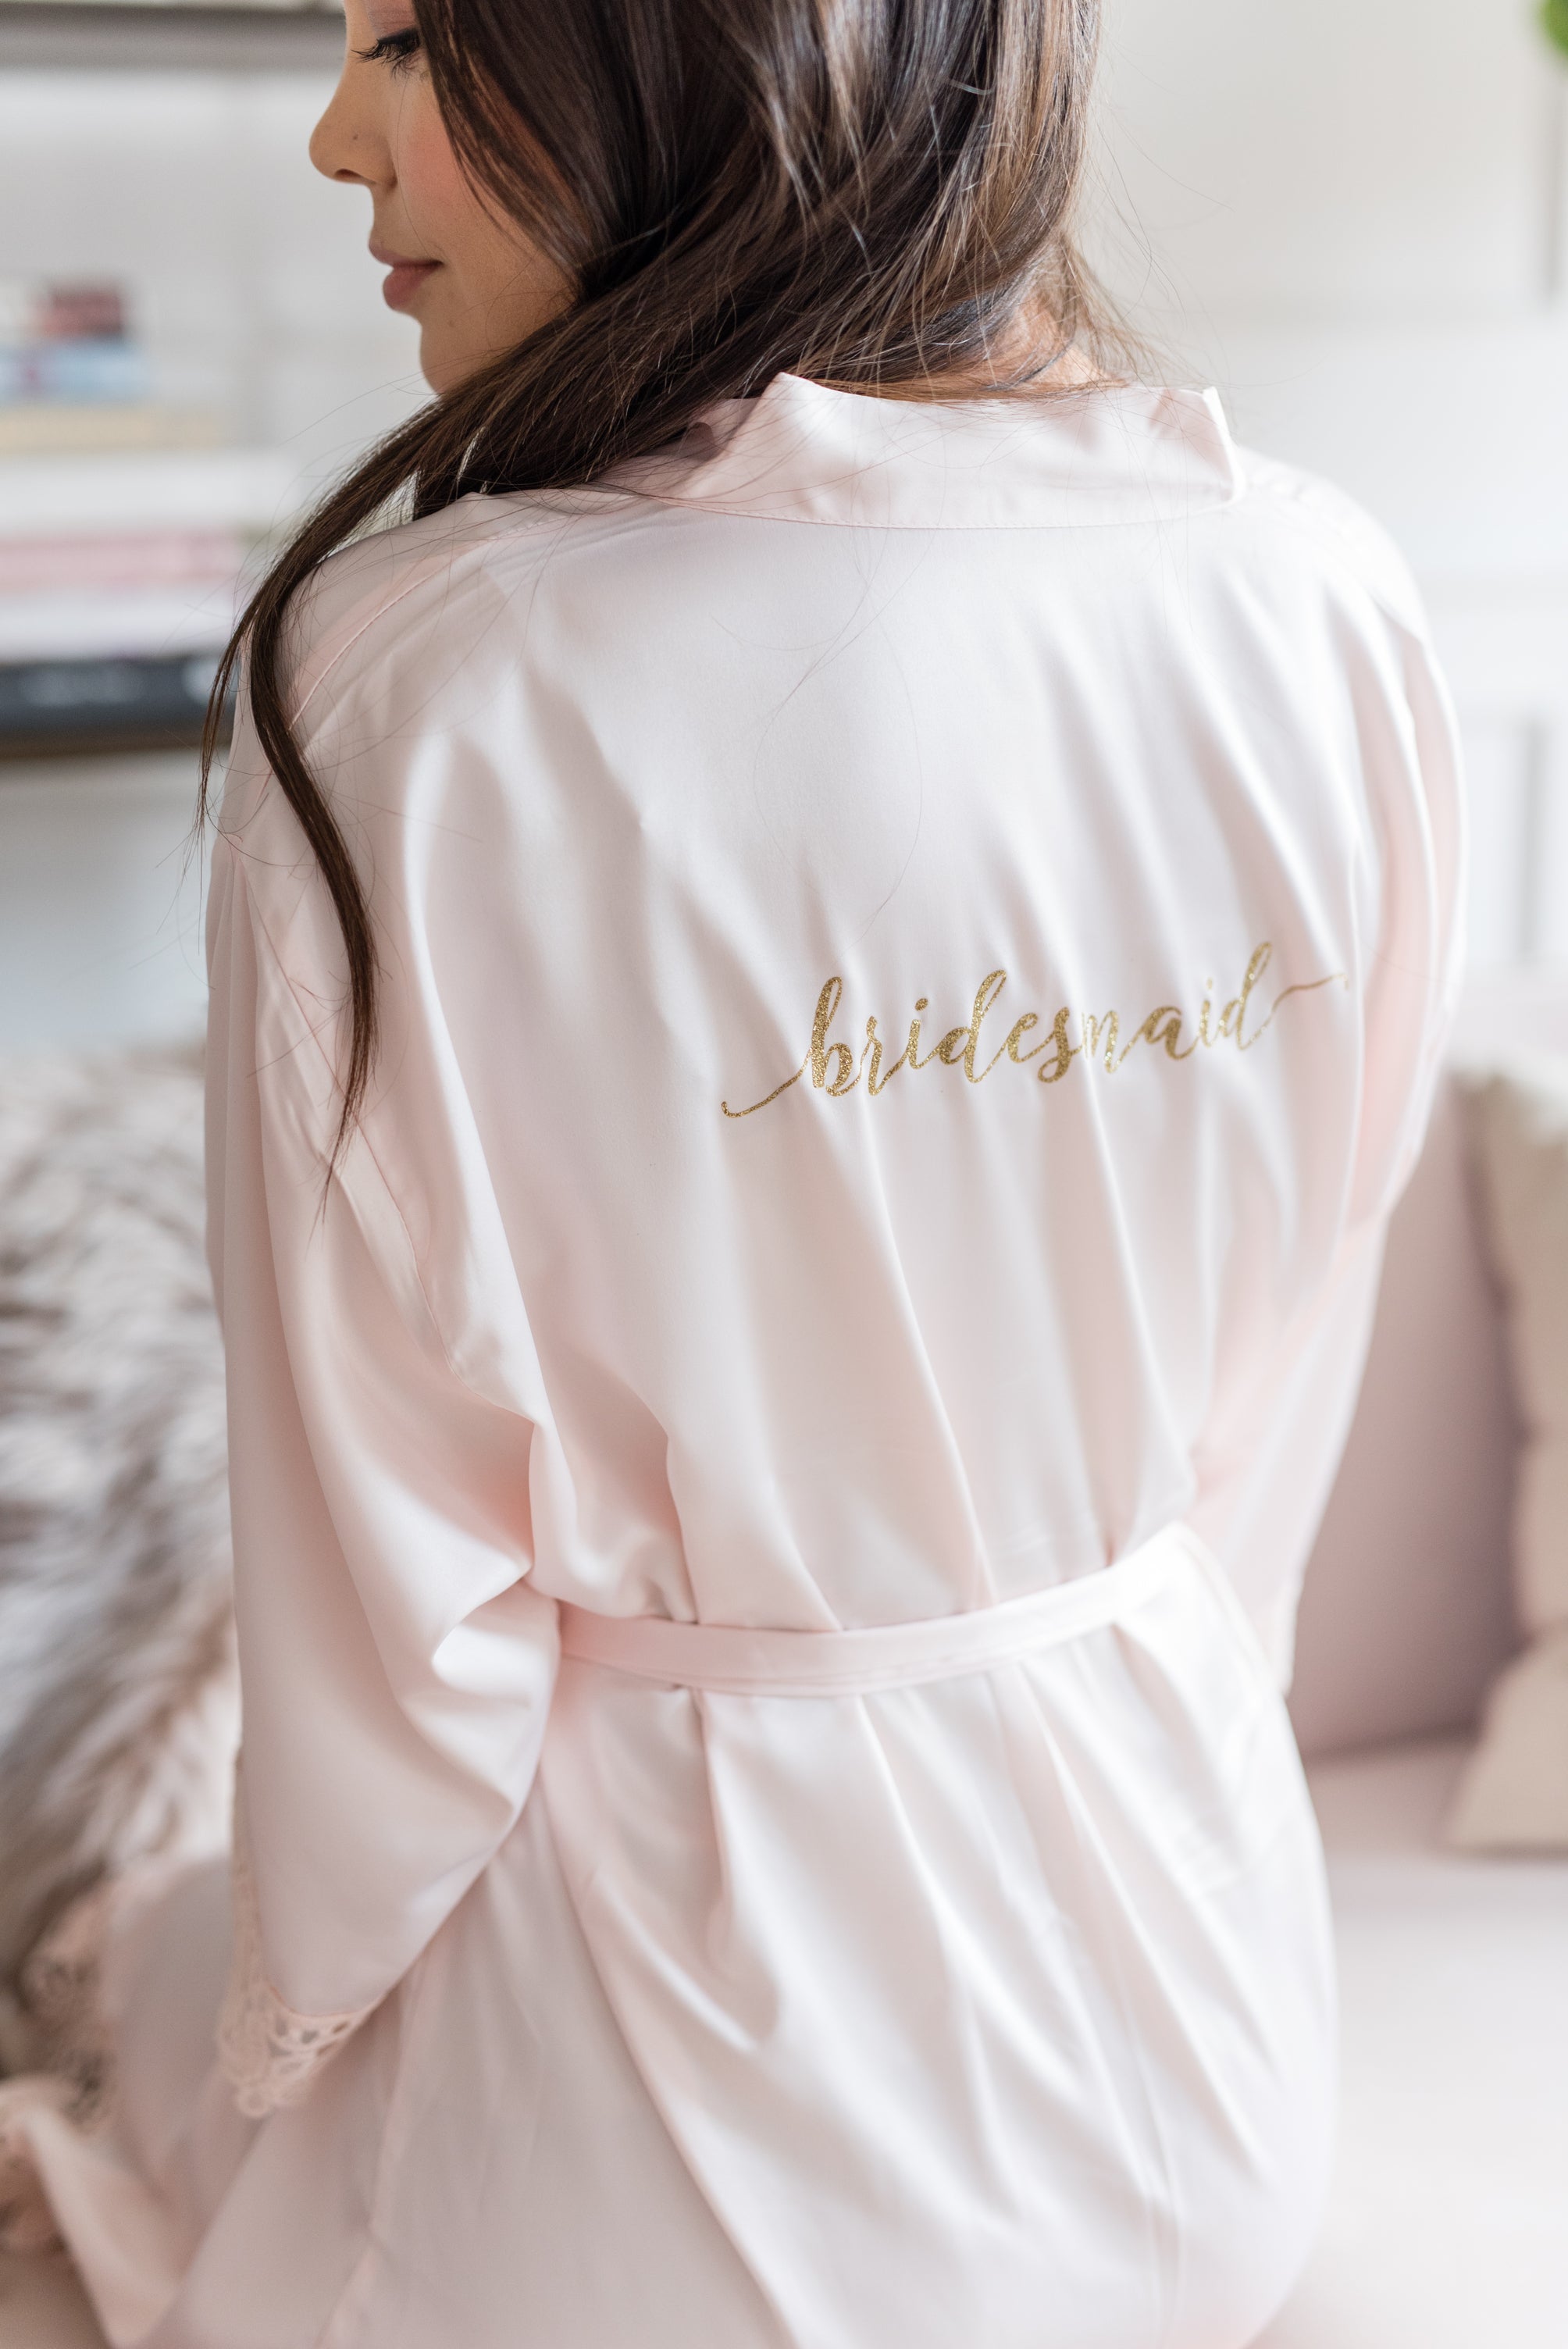 Satin Bridesmaid Robes - Personalized Blush Satin Bridesmaid robe with monogram on the back of the robe.